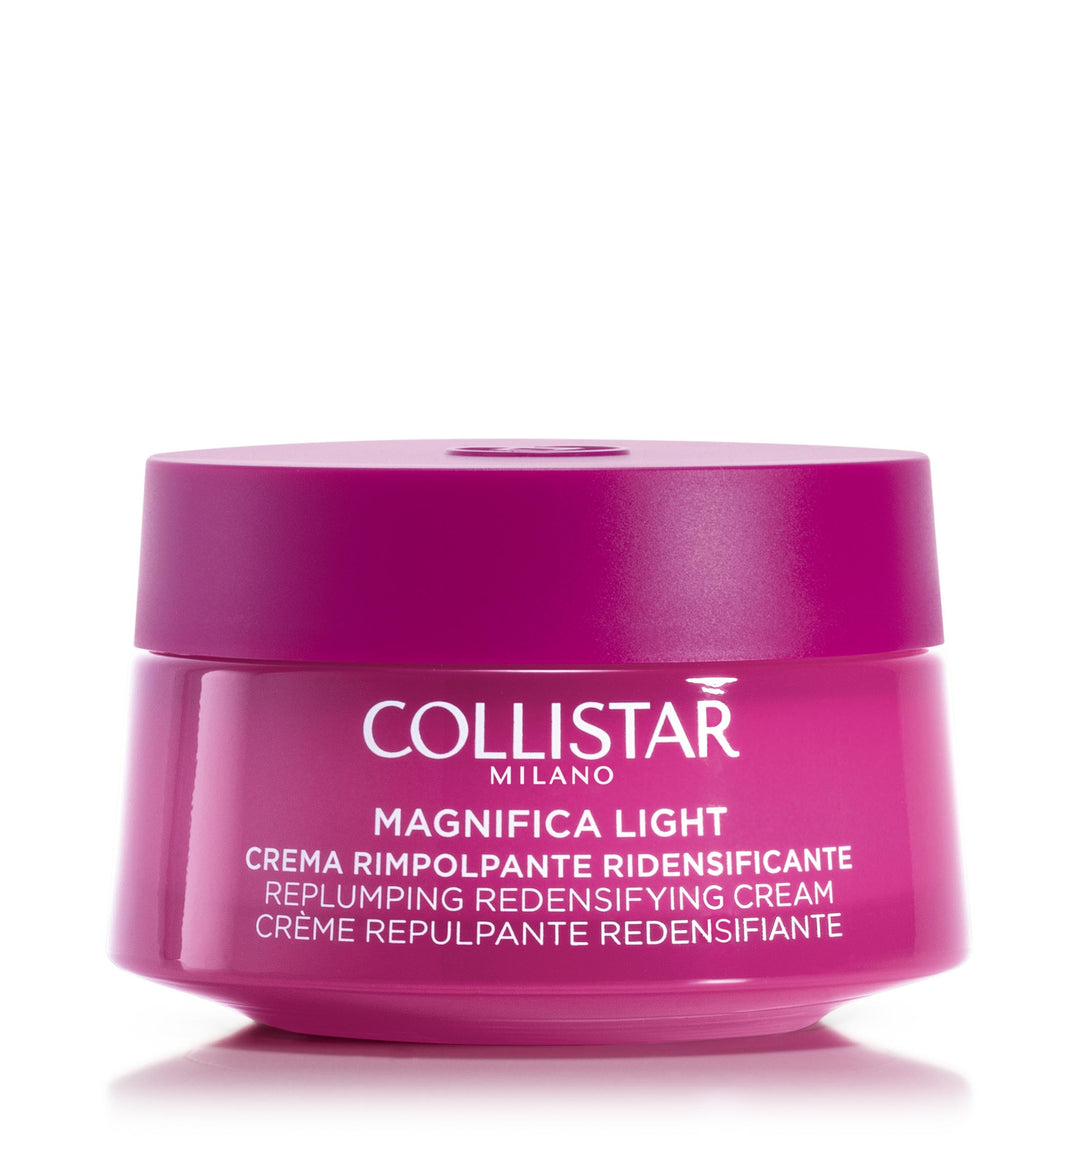 

Collistar Magnifica Light Plumping and Redensifying Face and Neck Cream 50 ml